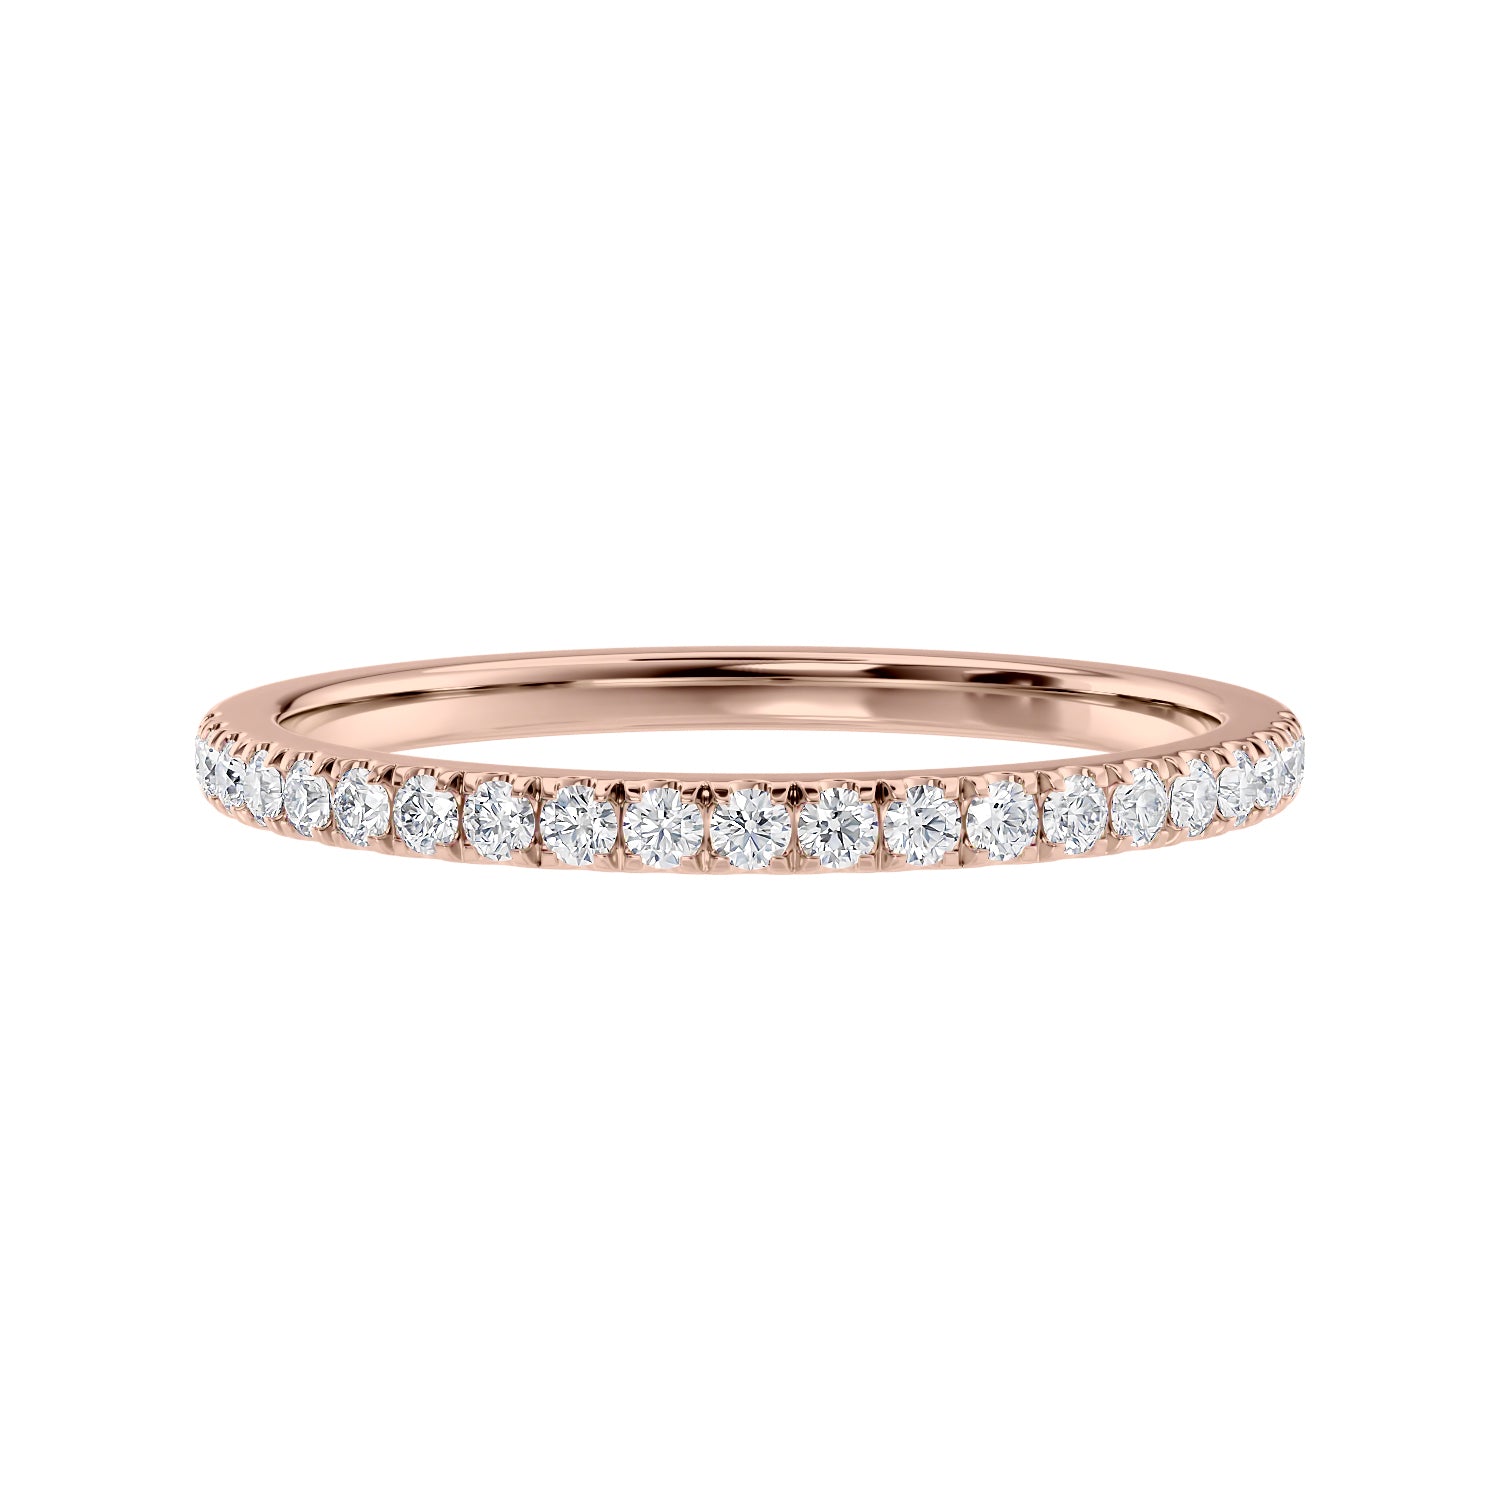 Rose gold 2mm diamond wedding ring front view.